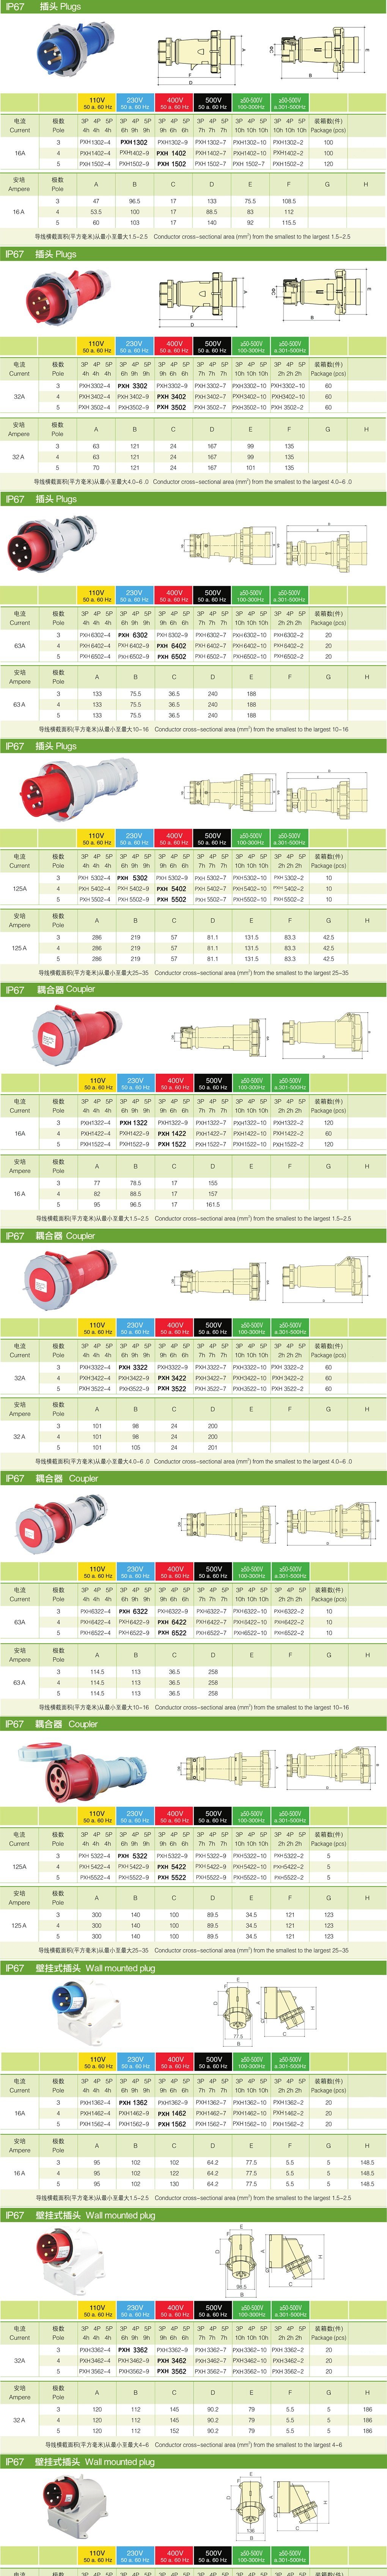 Ampere 125A IP67 European Standard Industrial and Multiphase Power Plugs and Sockets for Dark Oblique Sockets (Angle)